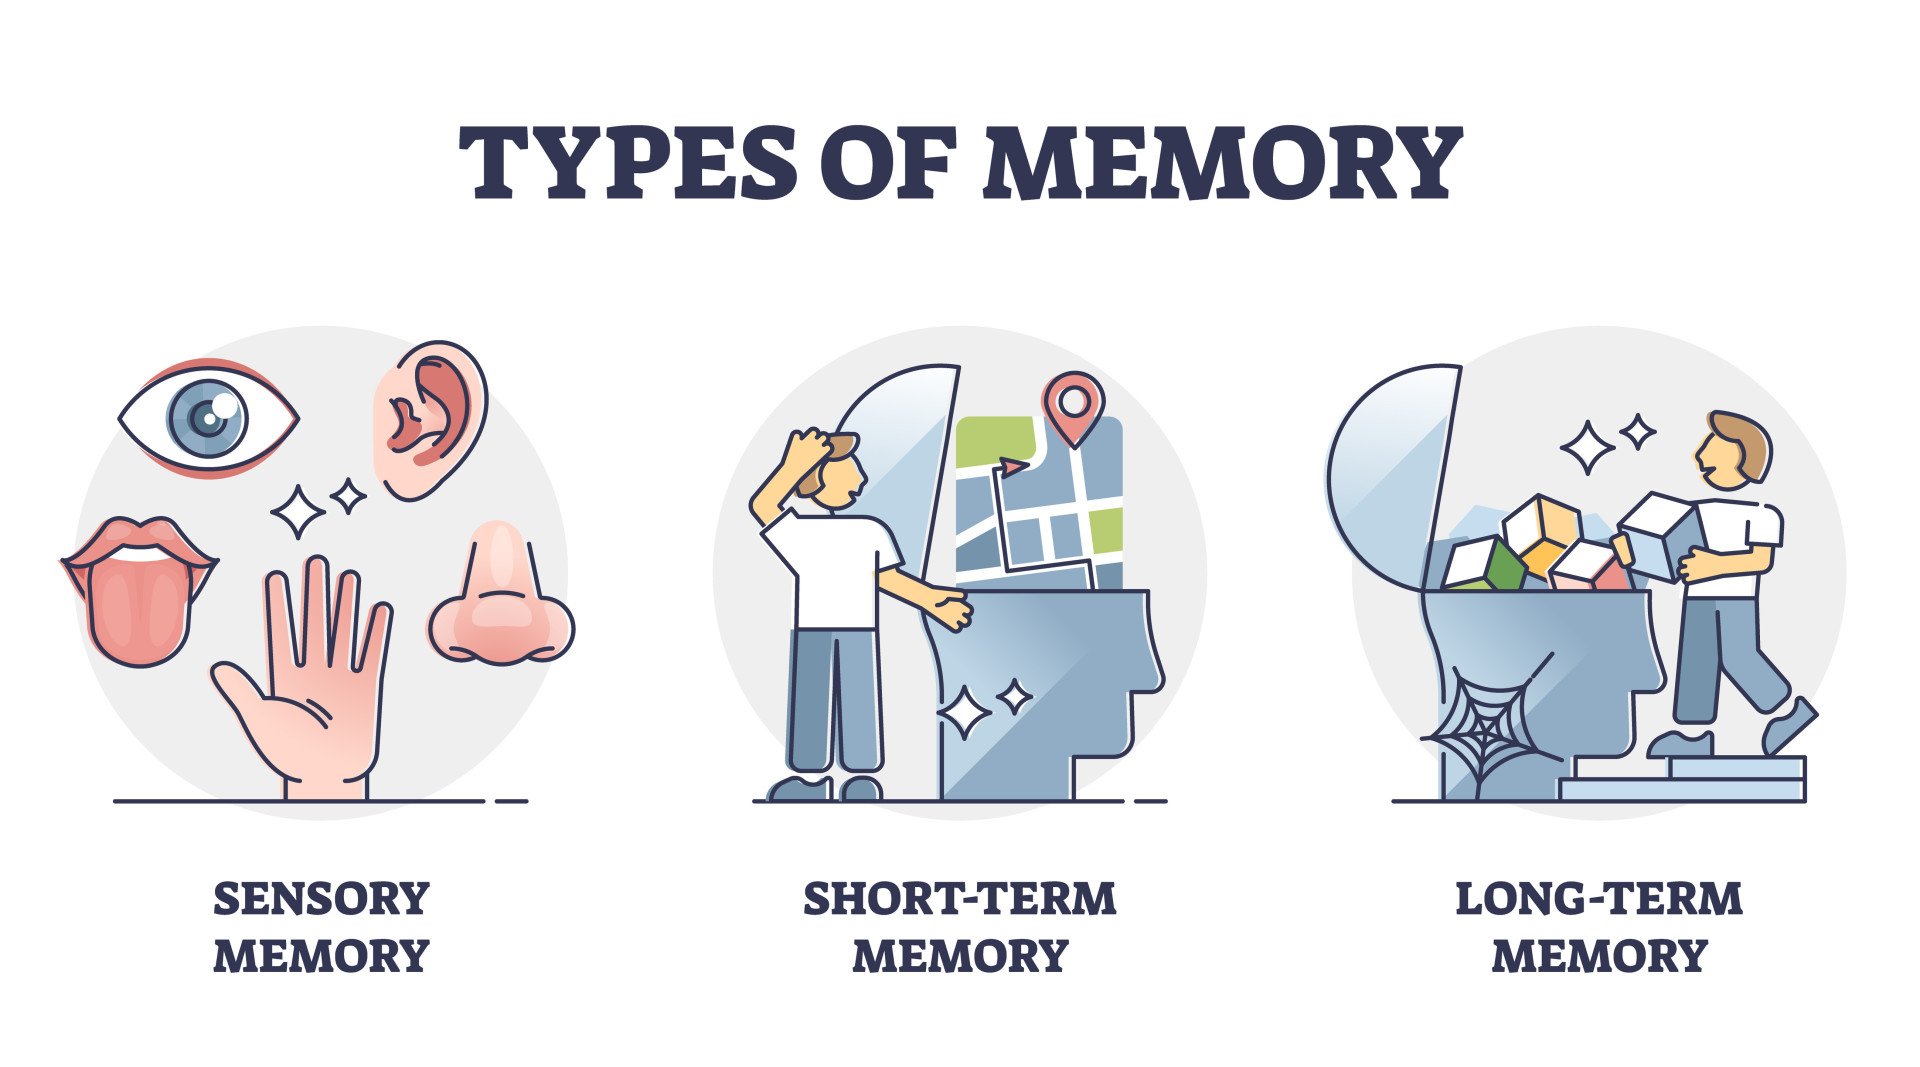 Types of memory - sensory, short-term and long-term, vector outline diagram. Sensory information transferred and stored as memories. Cognitive science